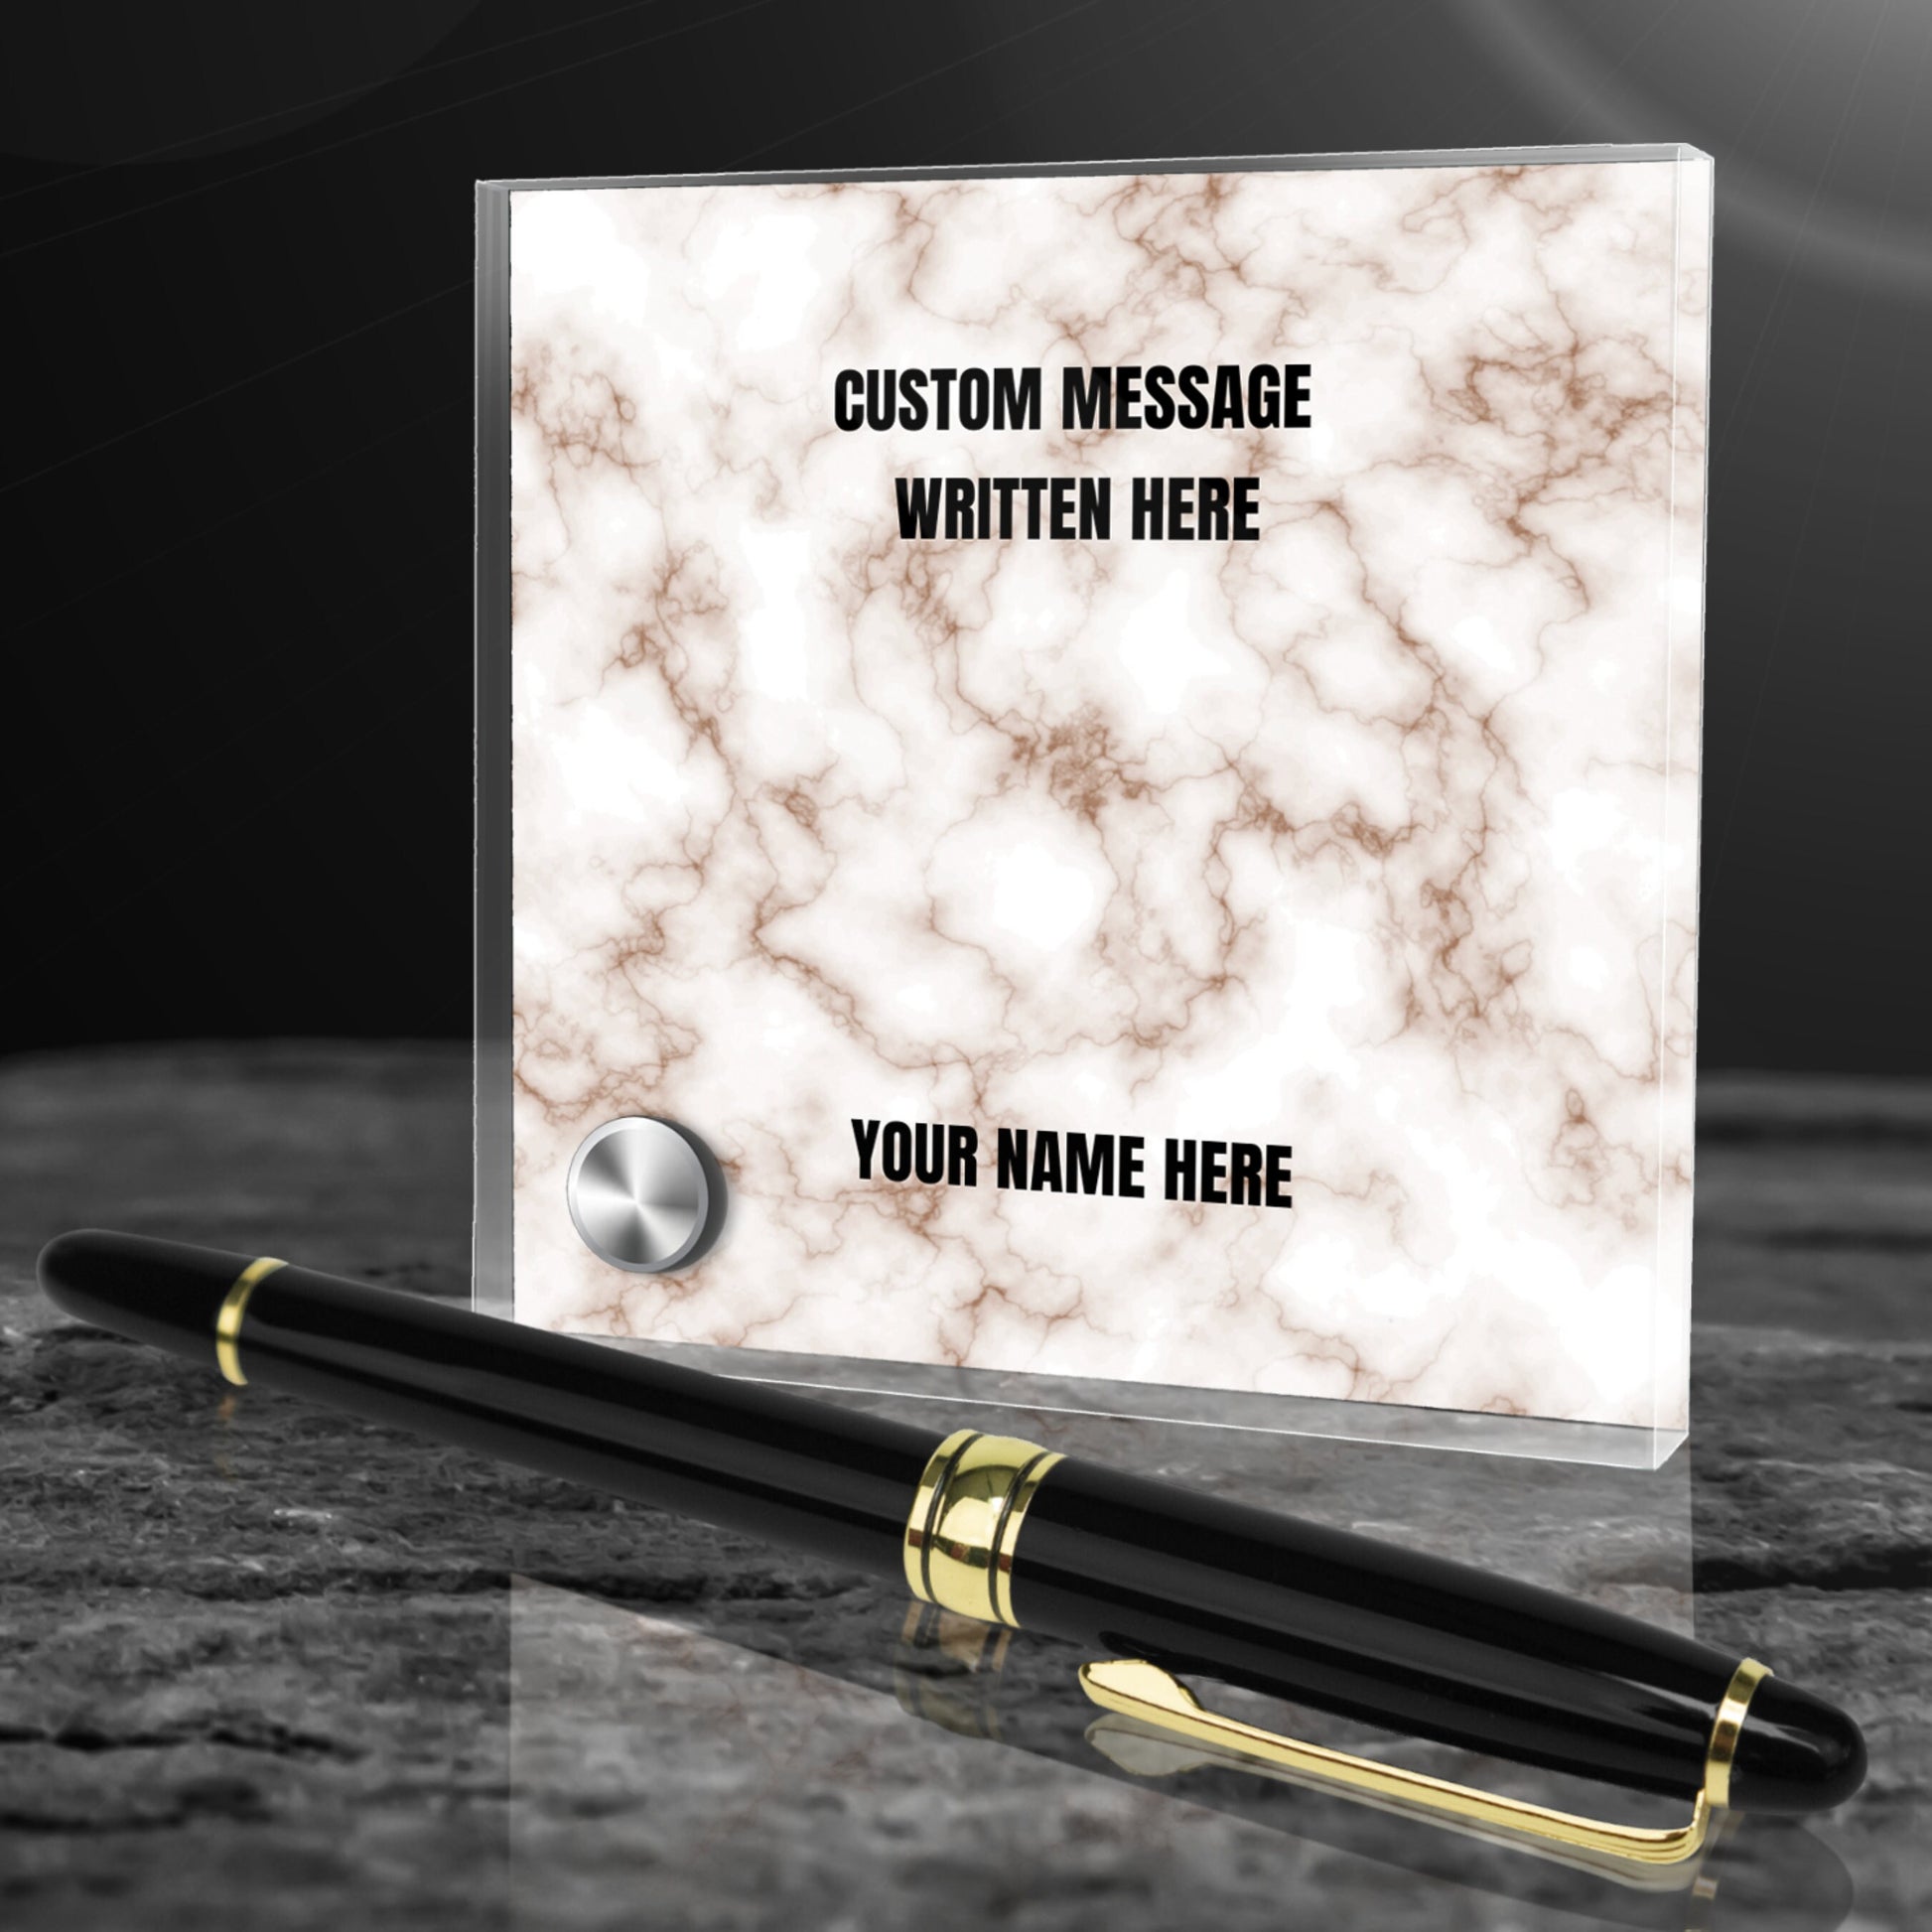 Personalized Goodbye Gift for Coworker,Pen and Message on Glass, Gift for Coworker,Coworker Pen Set with Message, Farewell Gift for Coworker